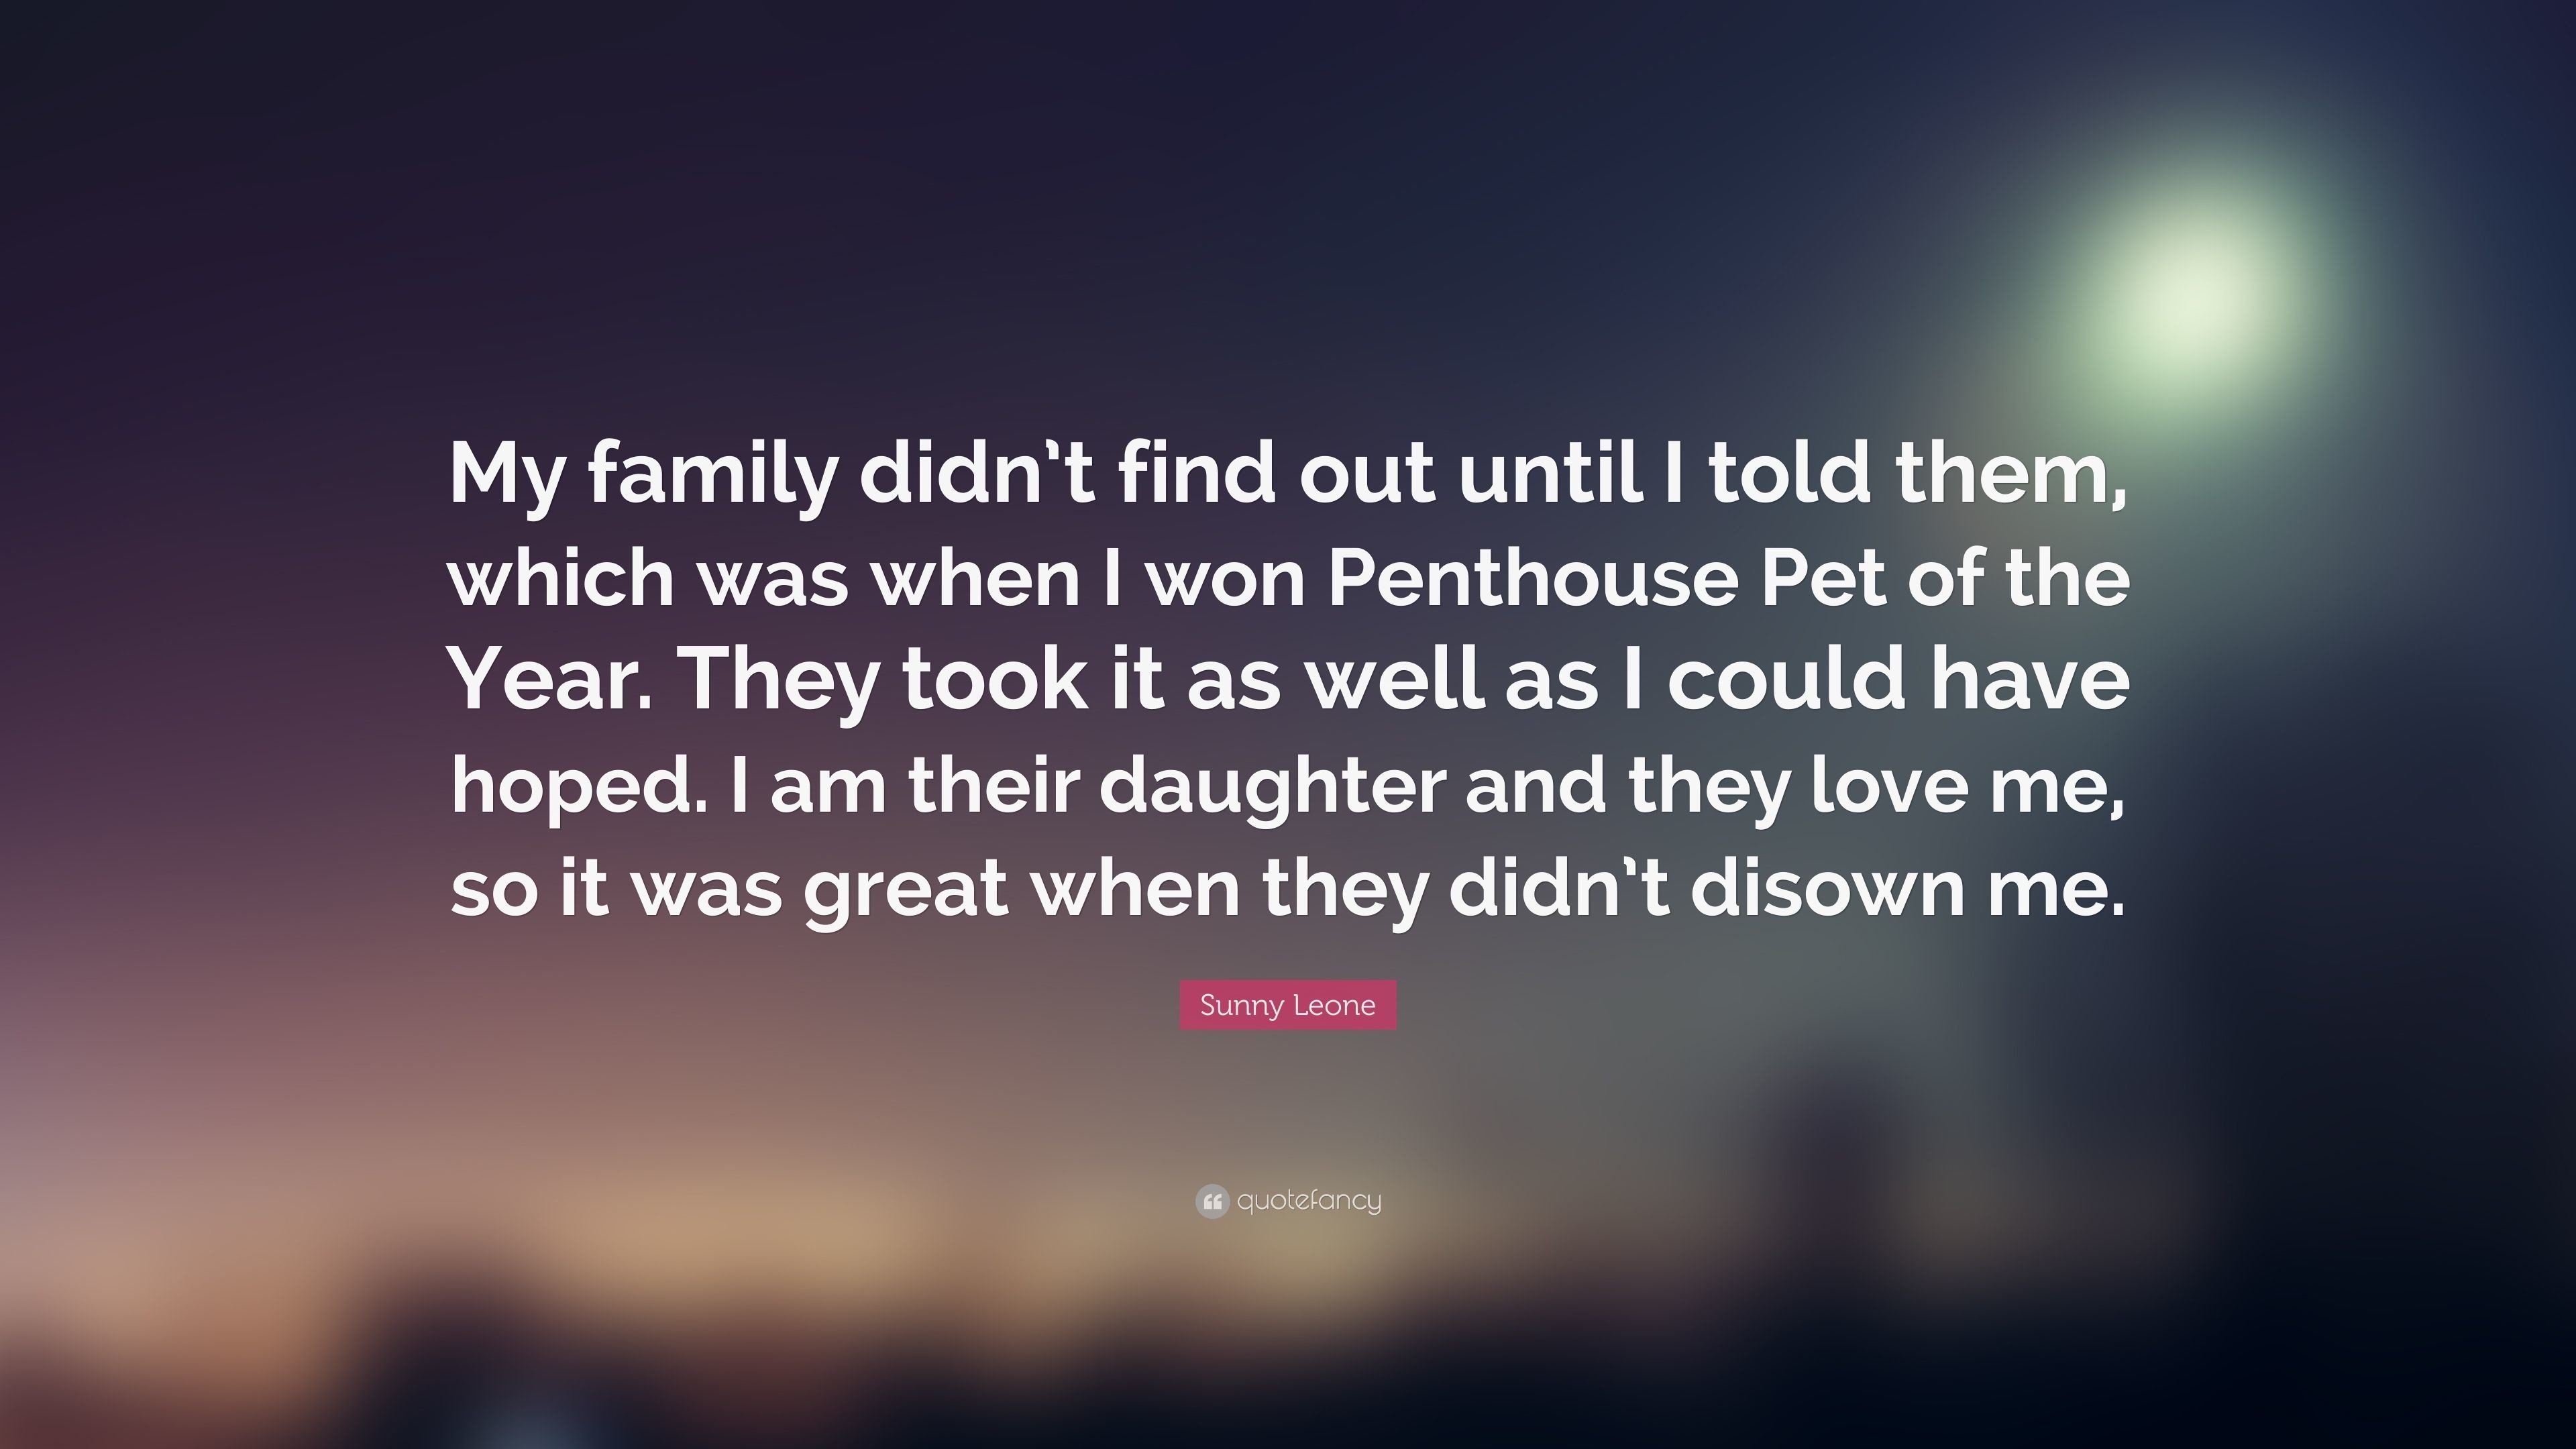 3840x2160 Sunny Leone Quote: “My family didn't find out until I told them